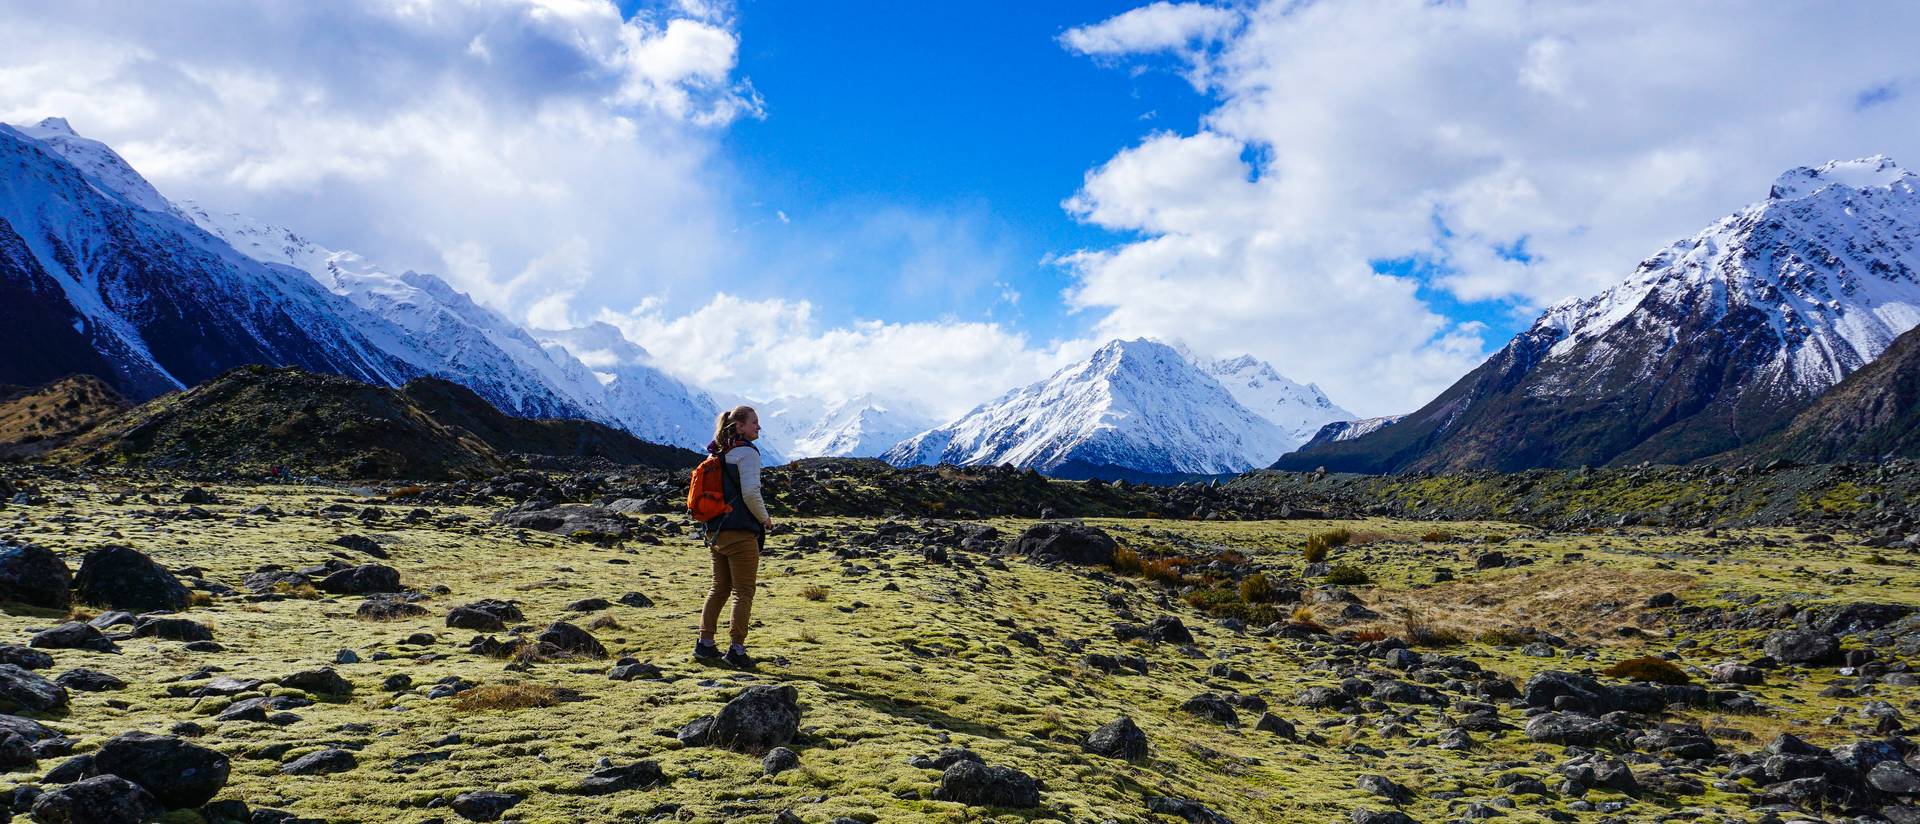 Student standing in a mountain vista, sunny day snow capped mountains